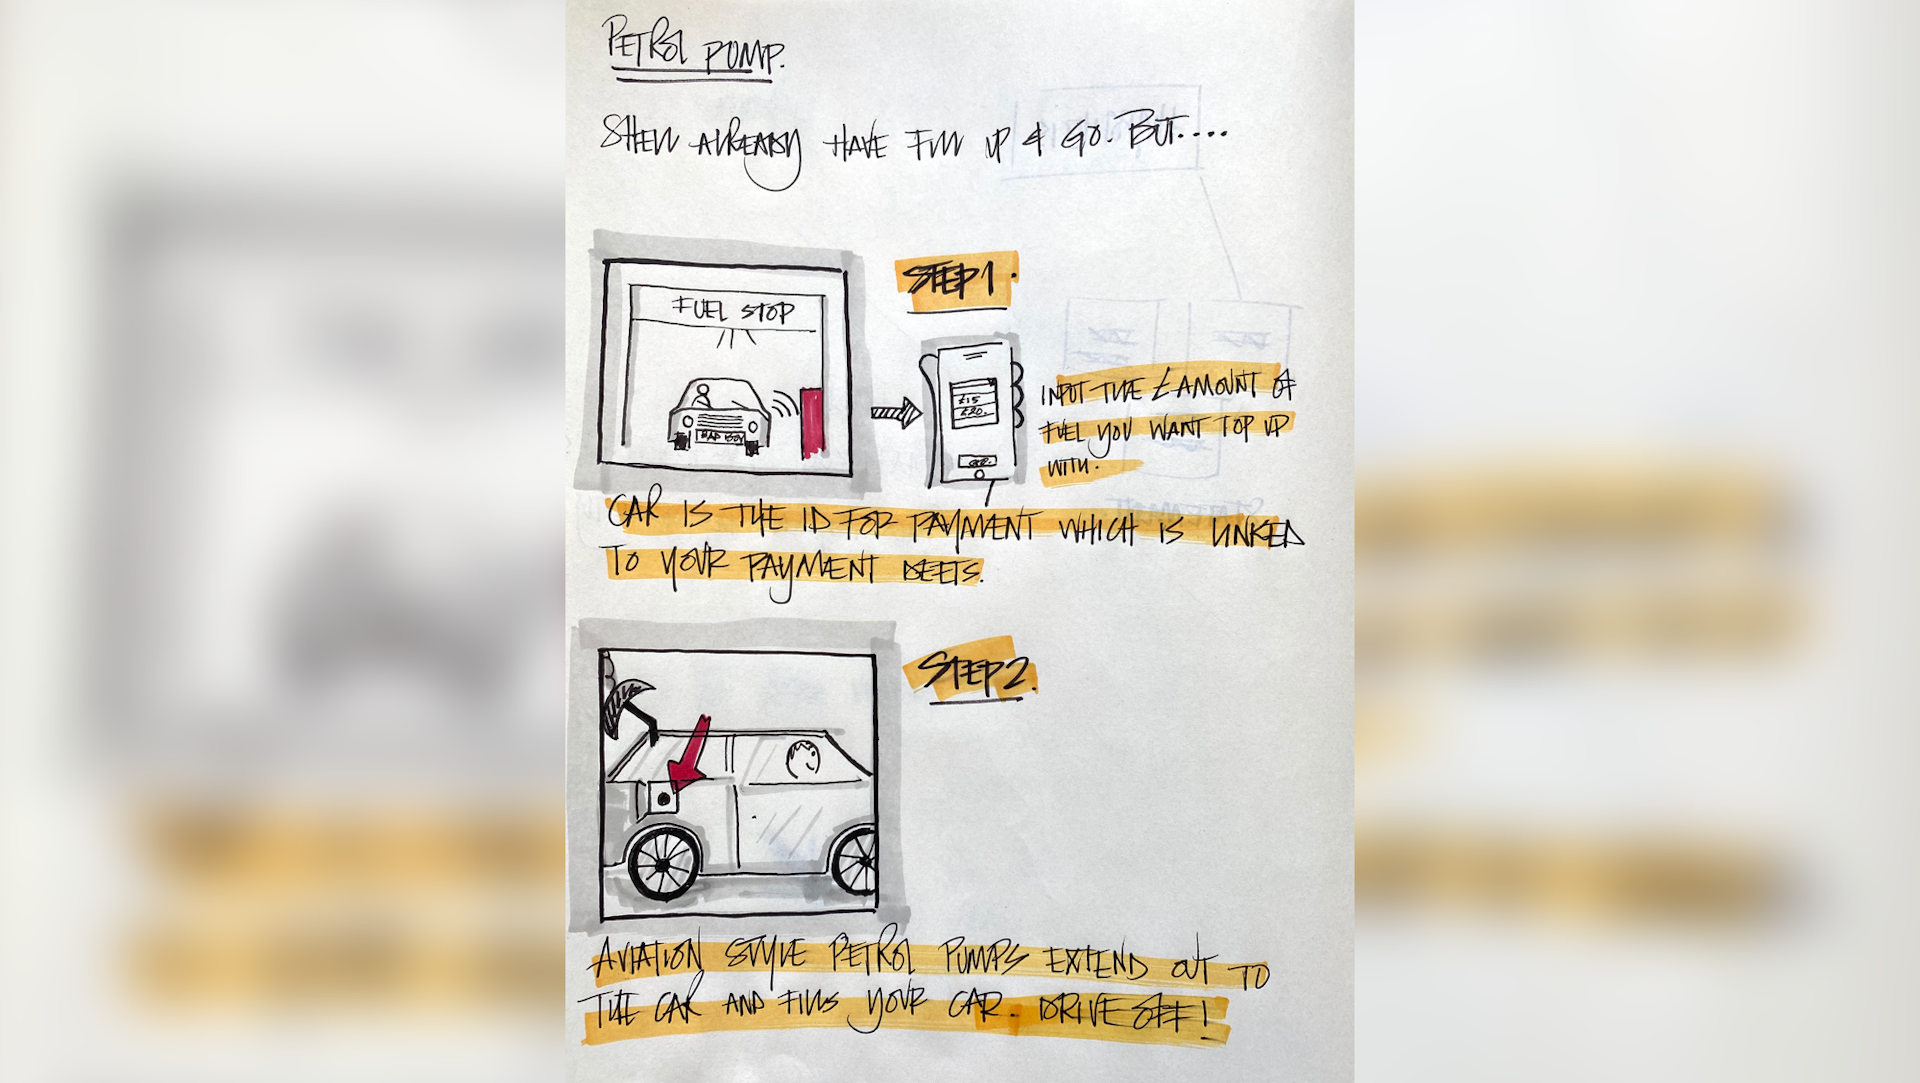 Storyboard that shows what touchless petrol pumps could look like.